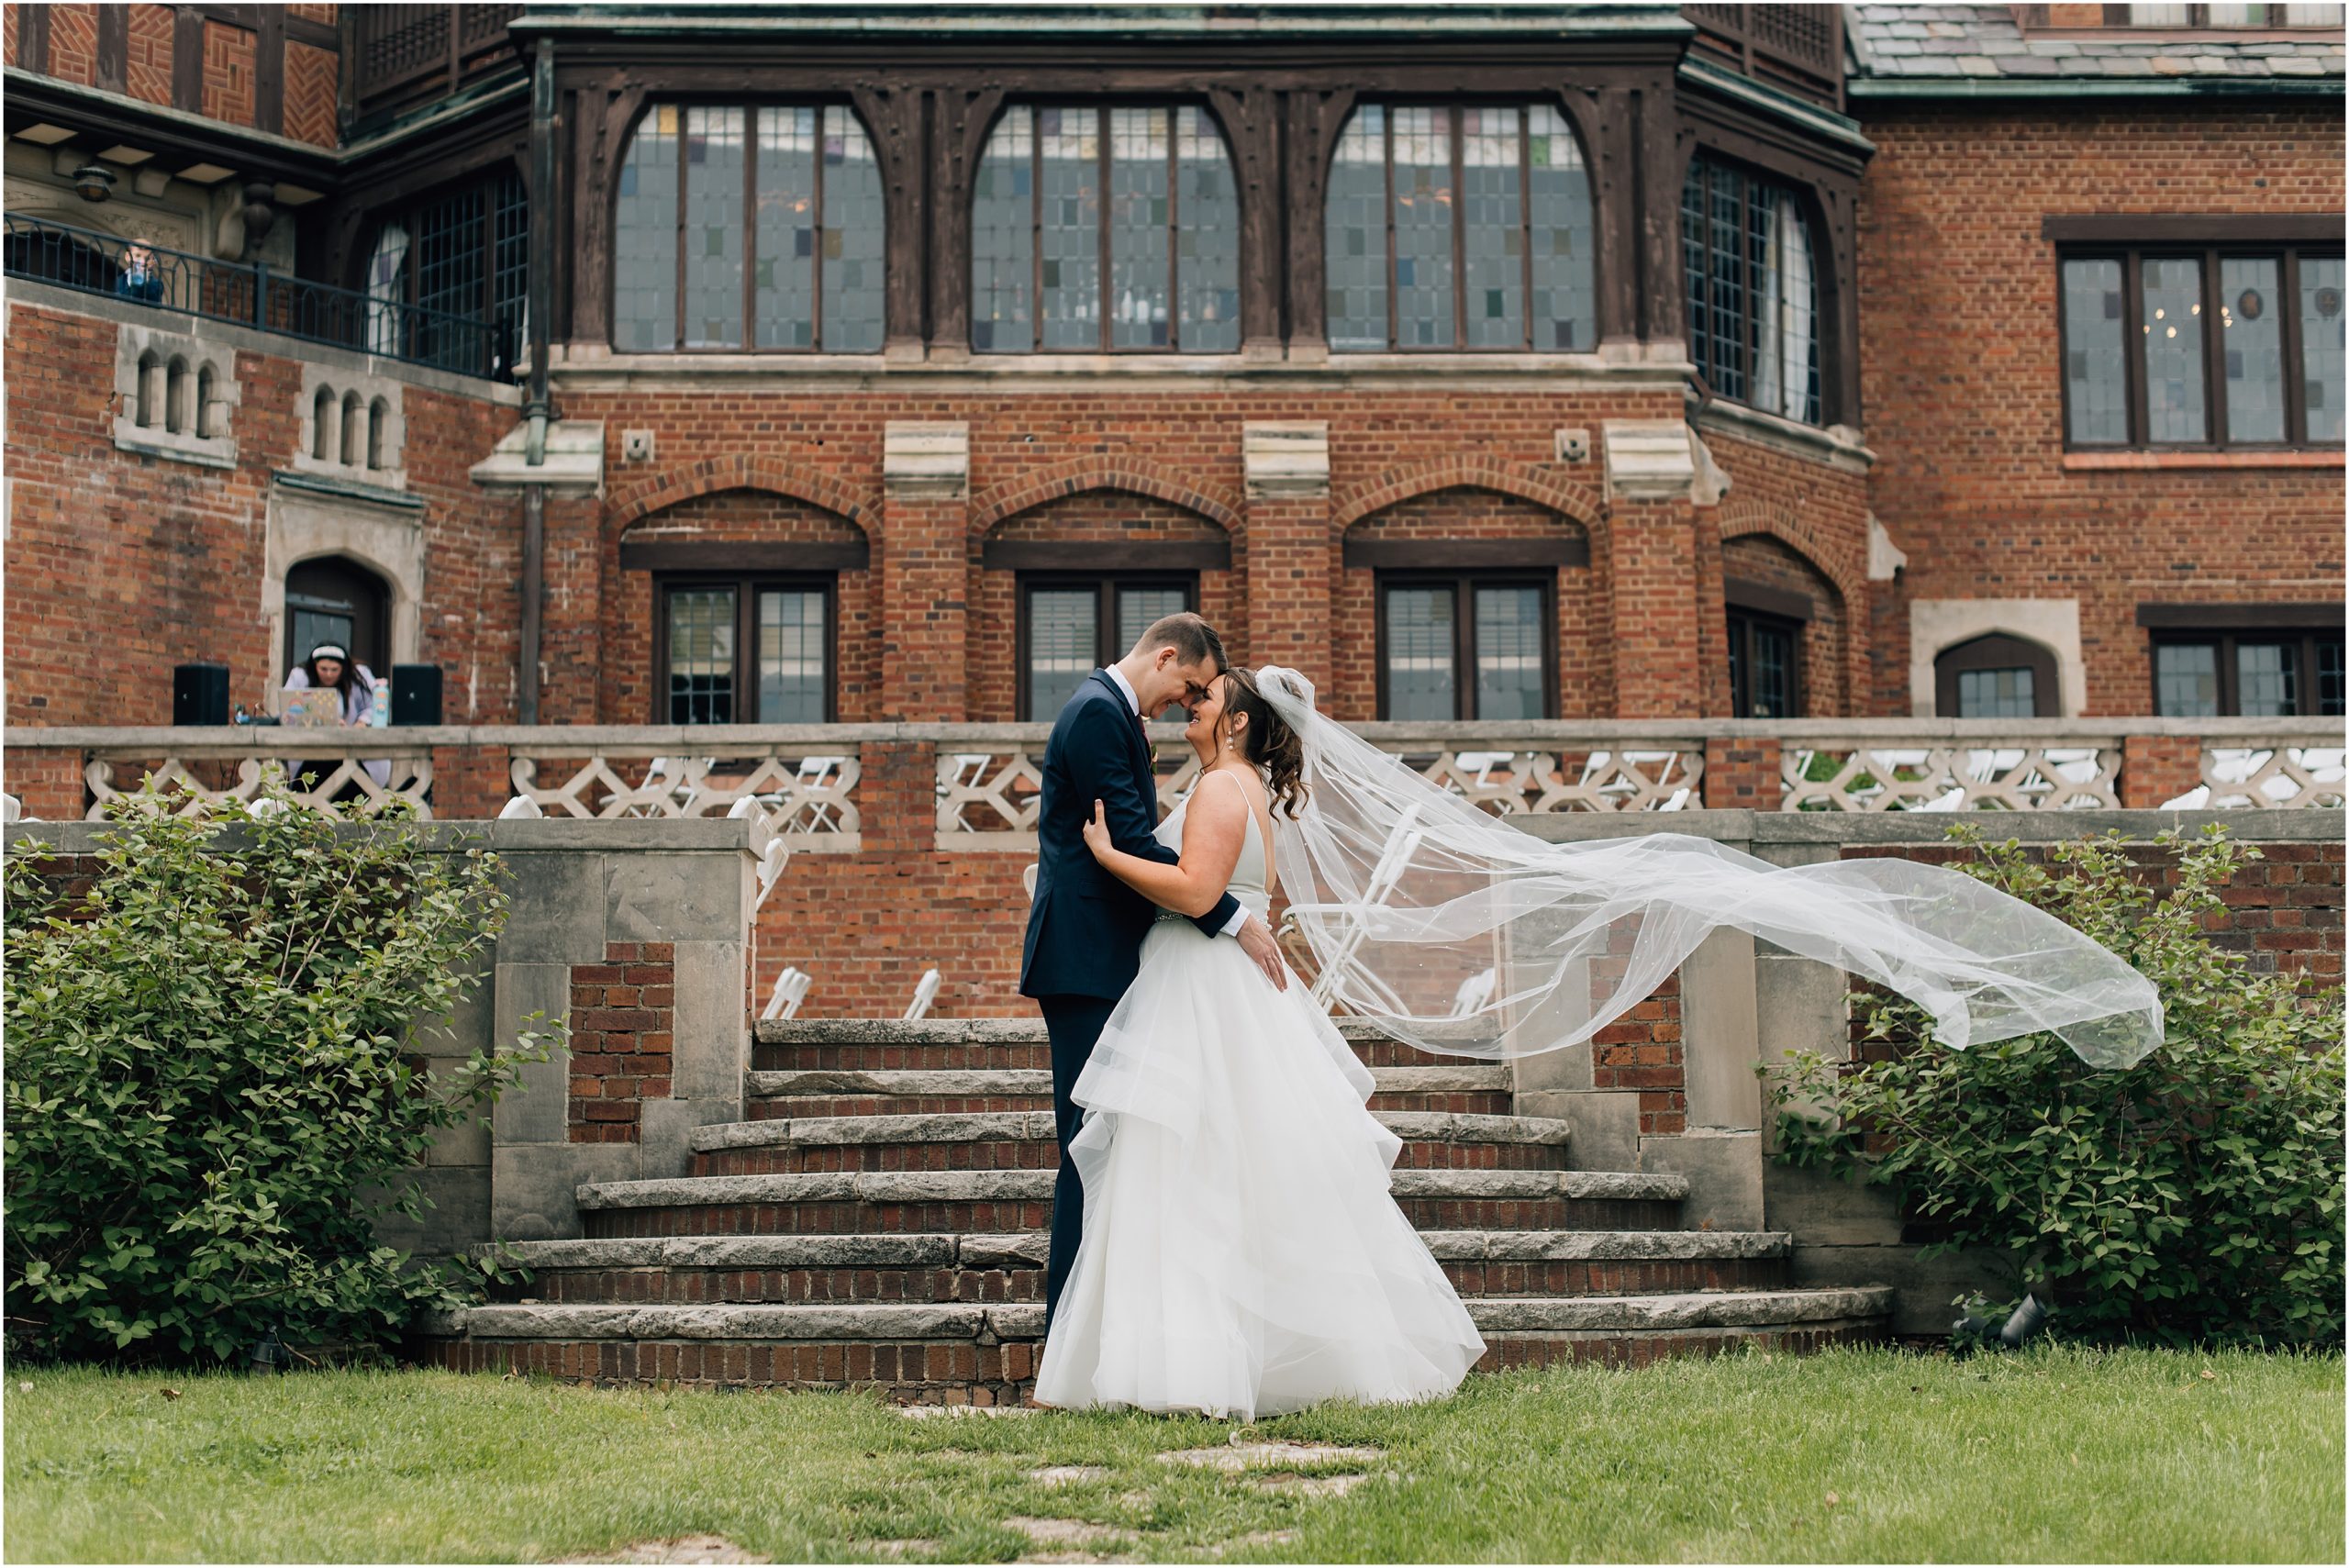 Bride and Groom talk while the bride's long veil blows in the wind in front of Rollins Mansion. Photo by Anna Brace who specializes in Omaha Nebraska Photographer.